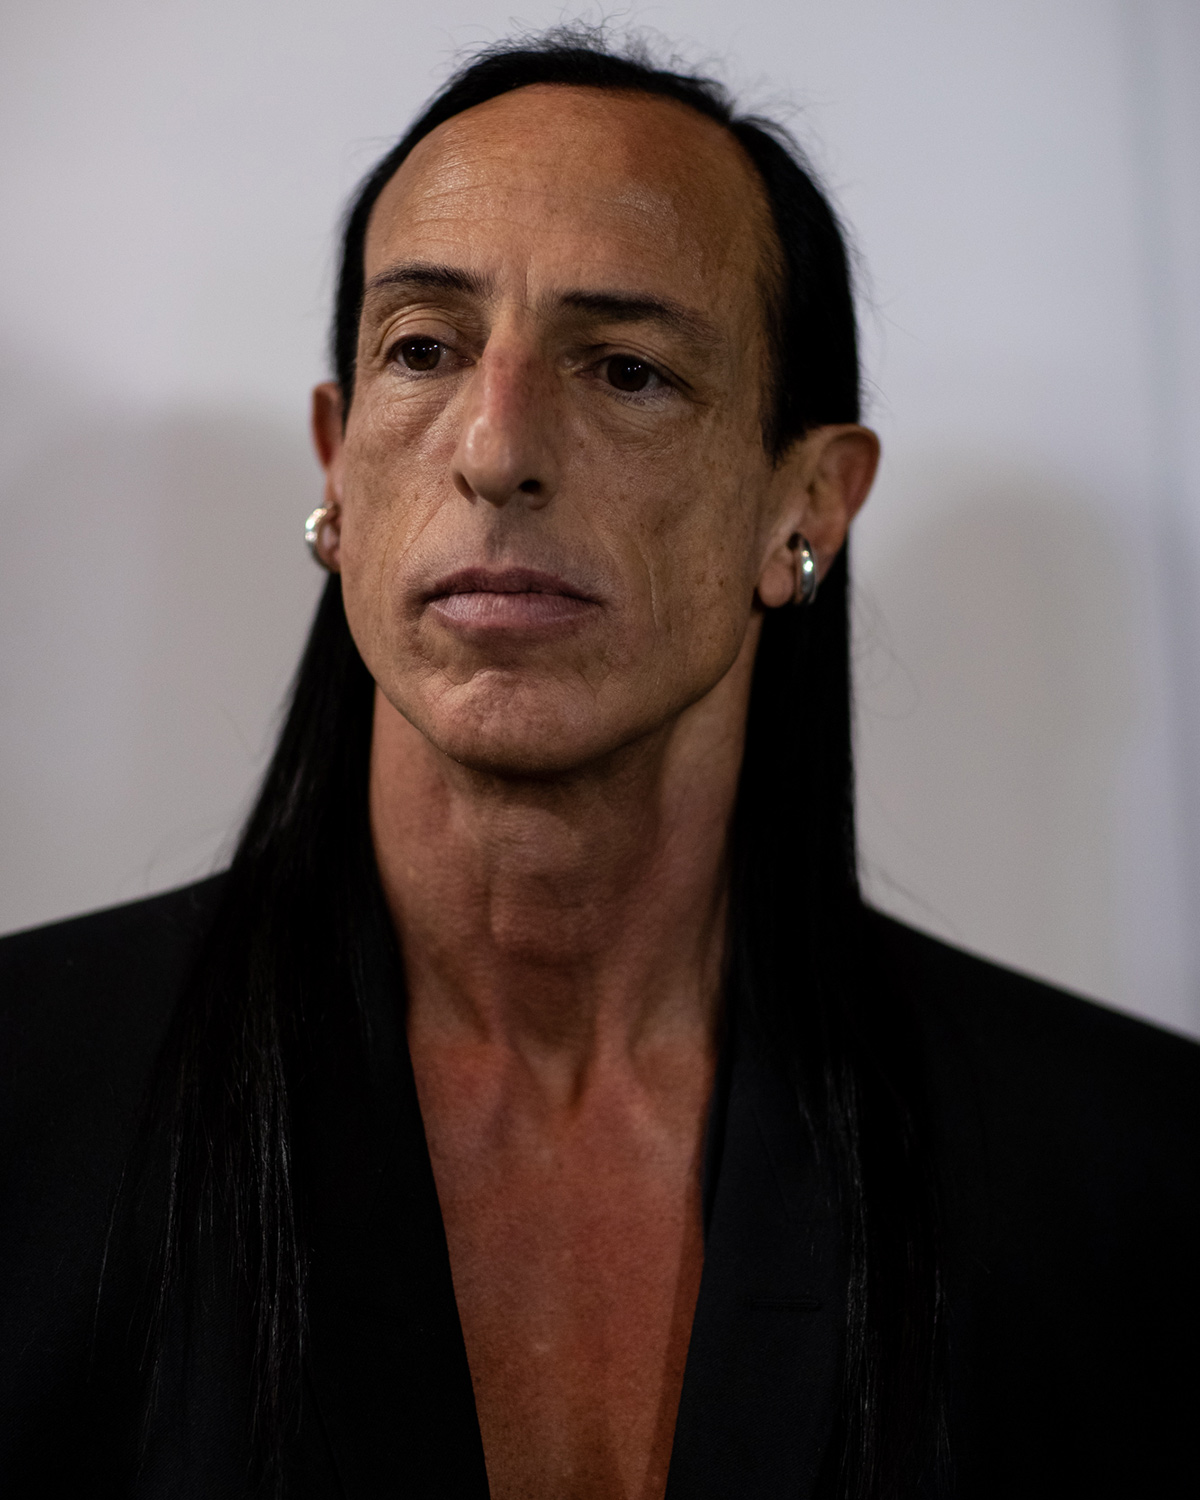 Rick Owens' 10 Most Outrageous Moments